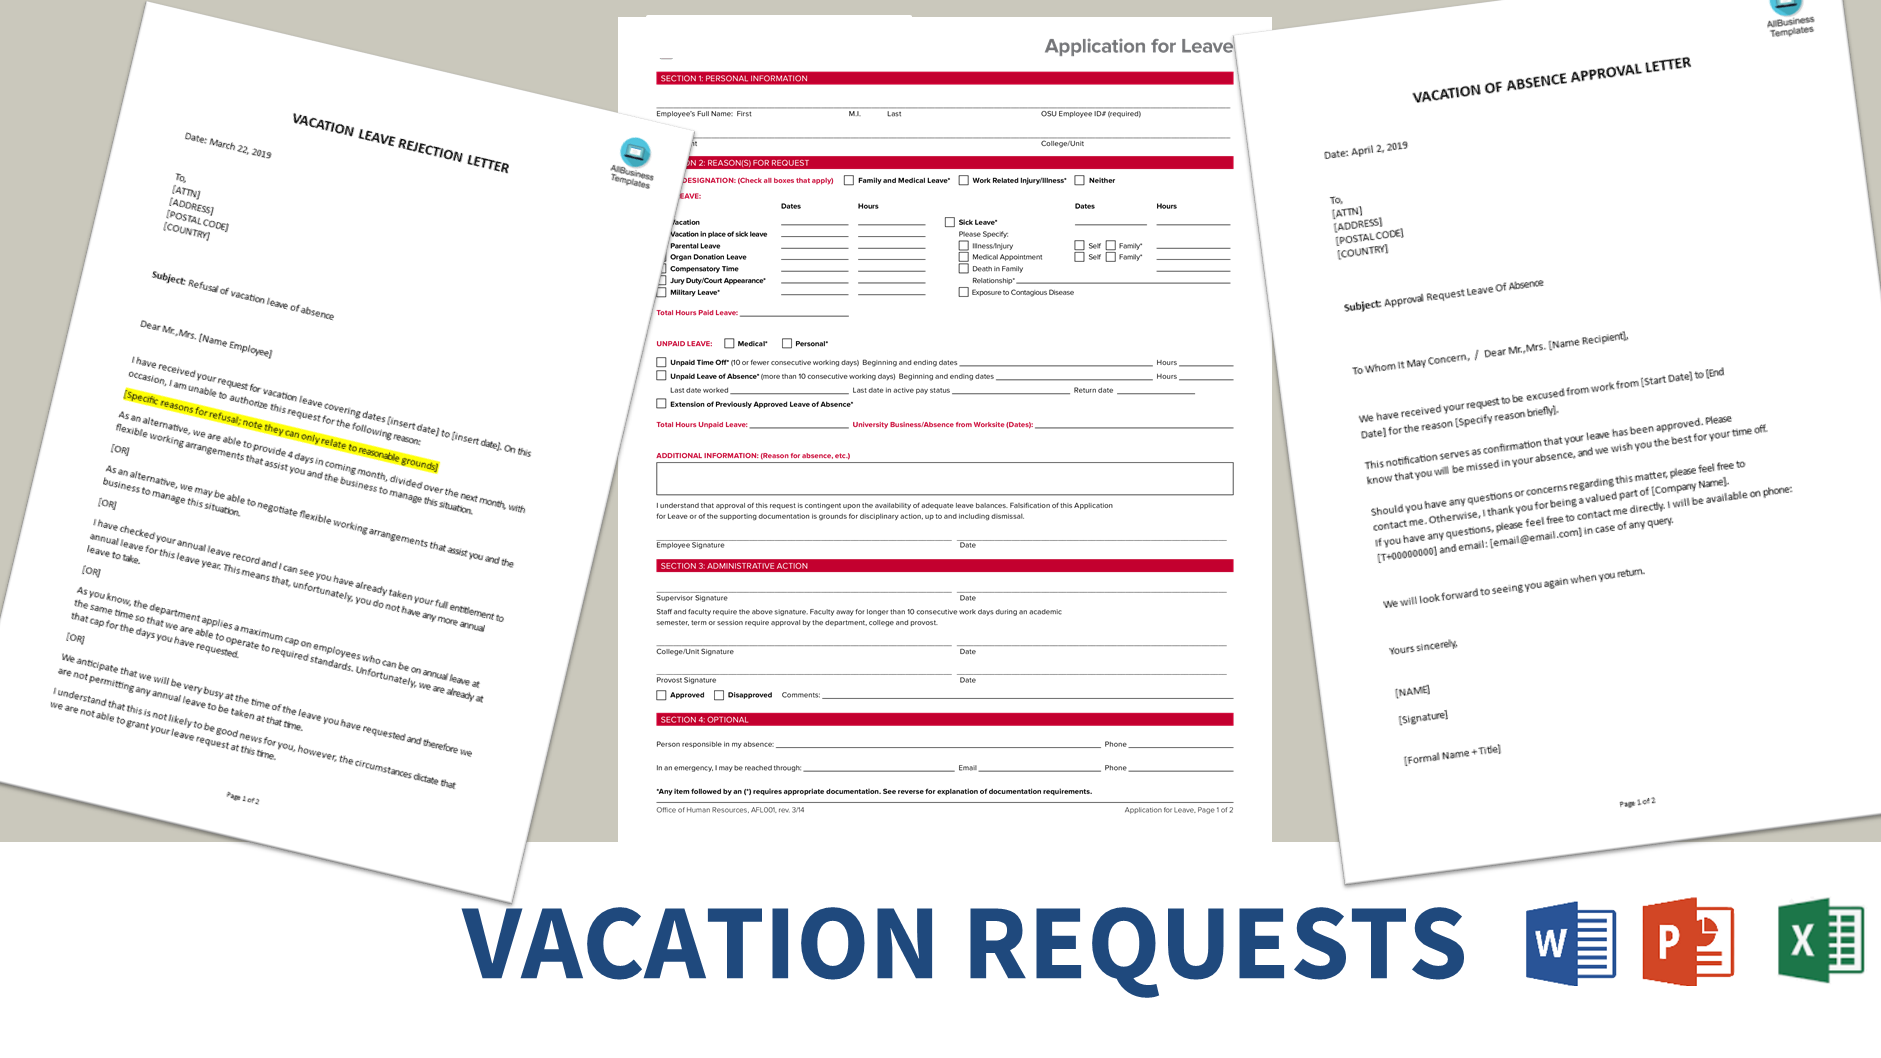 Vacation Request templates